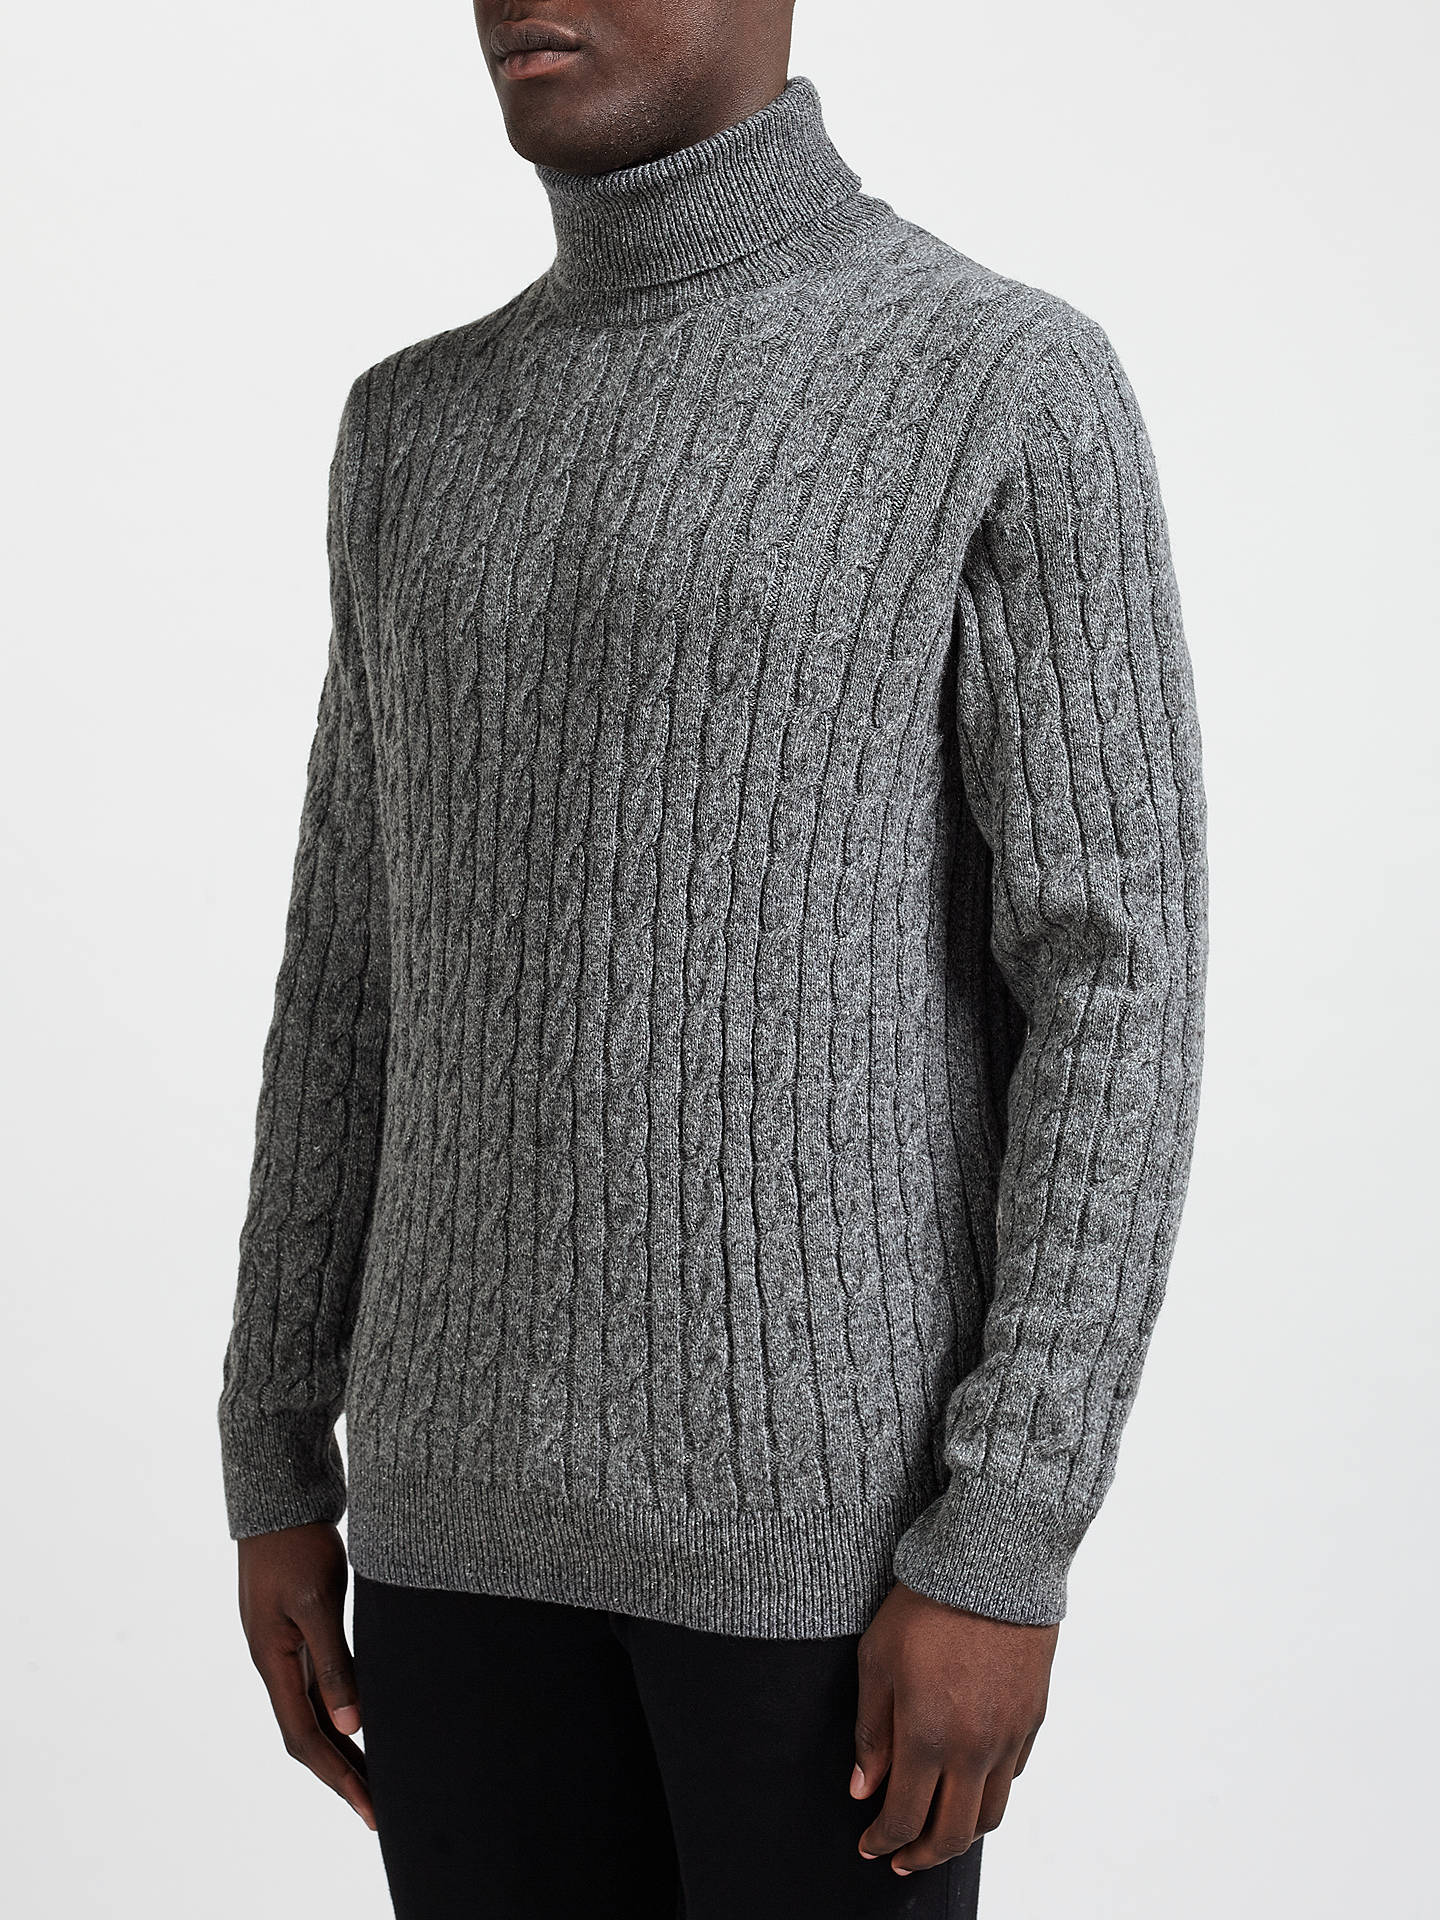 Barbour Greatcoat Upstart Roll Neck Cable Knit Jumper, Grey at John ...